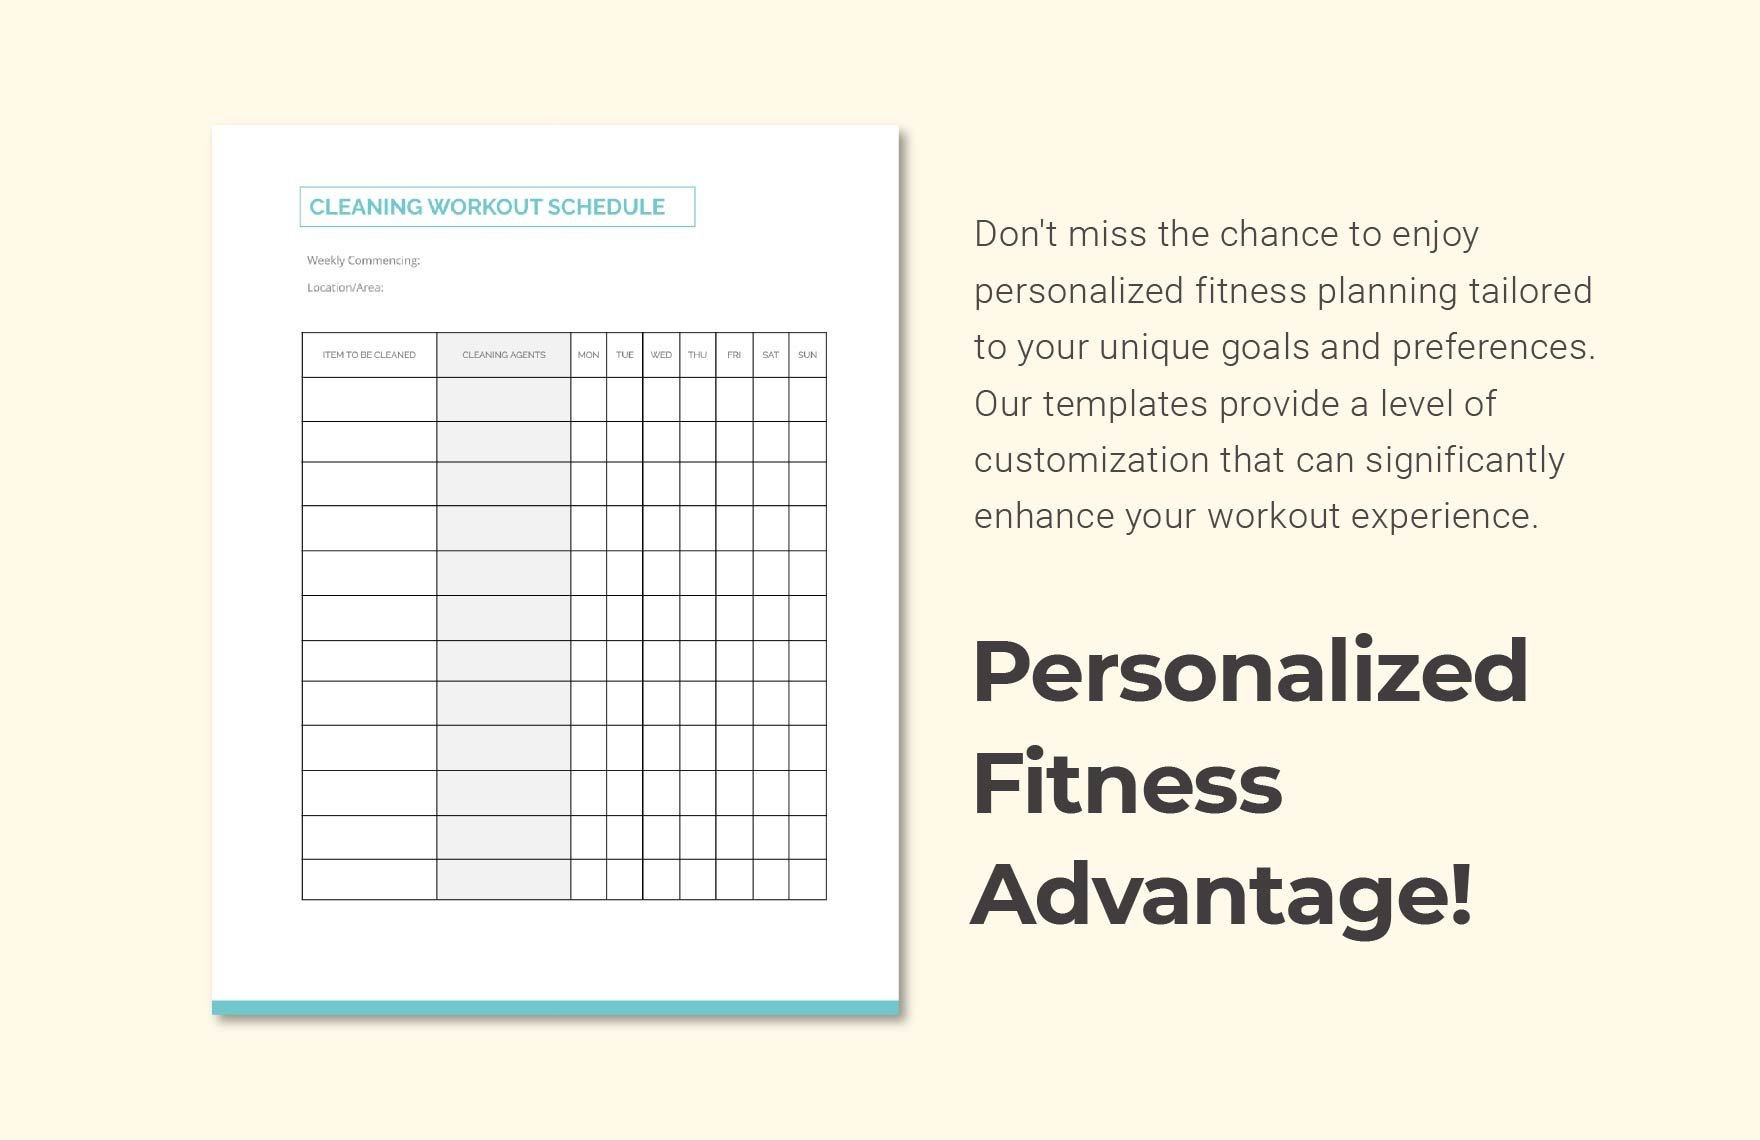 Sample Cleaning Workout Schedule Template